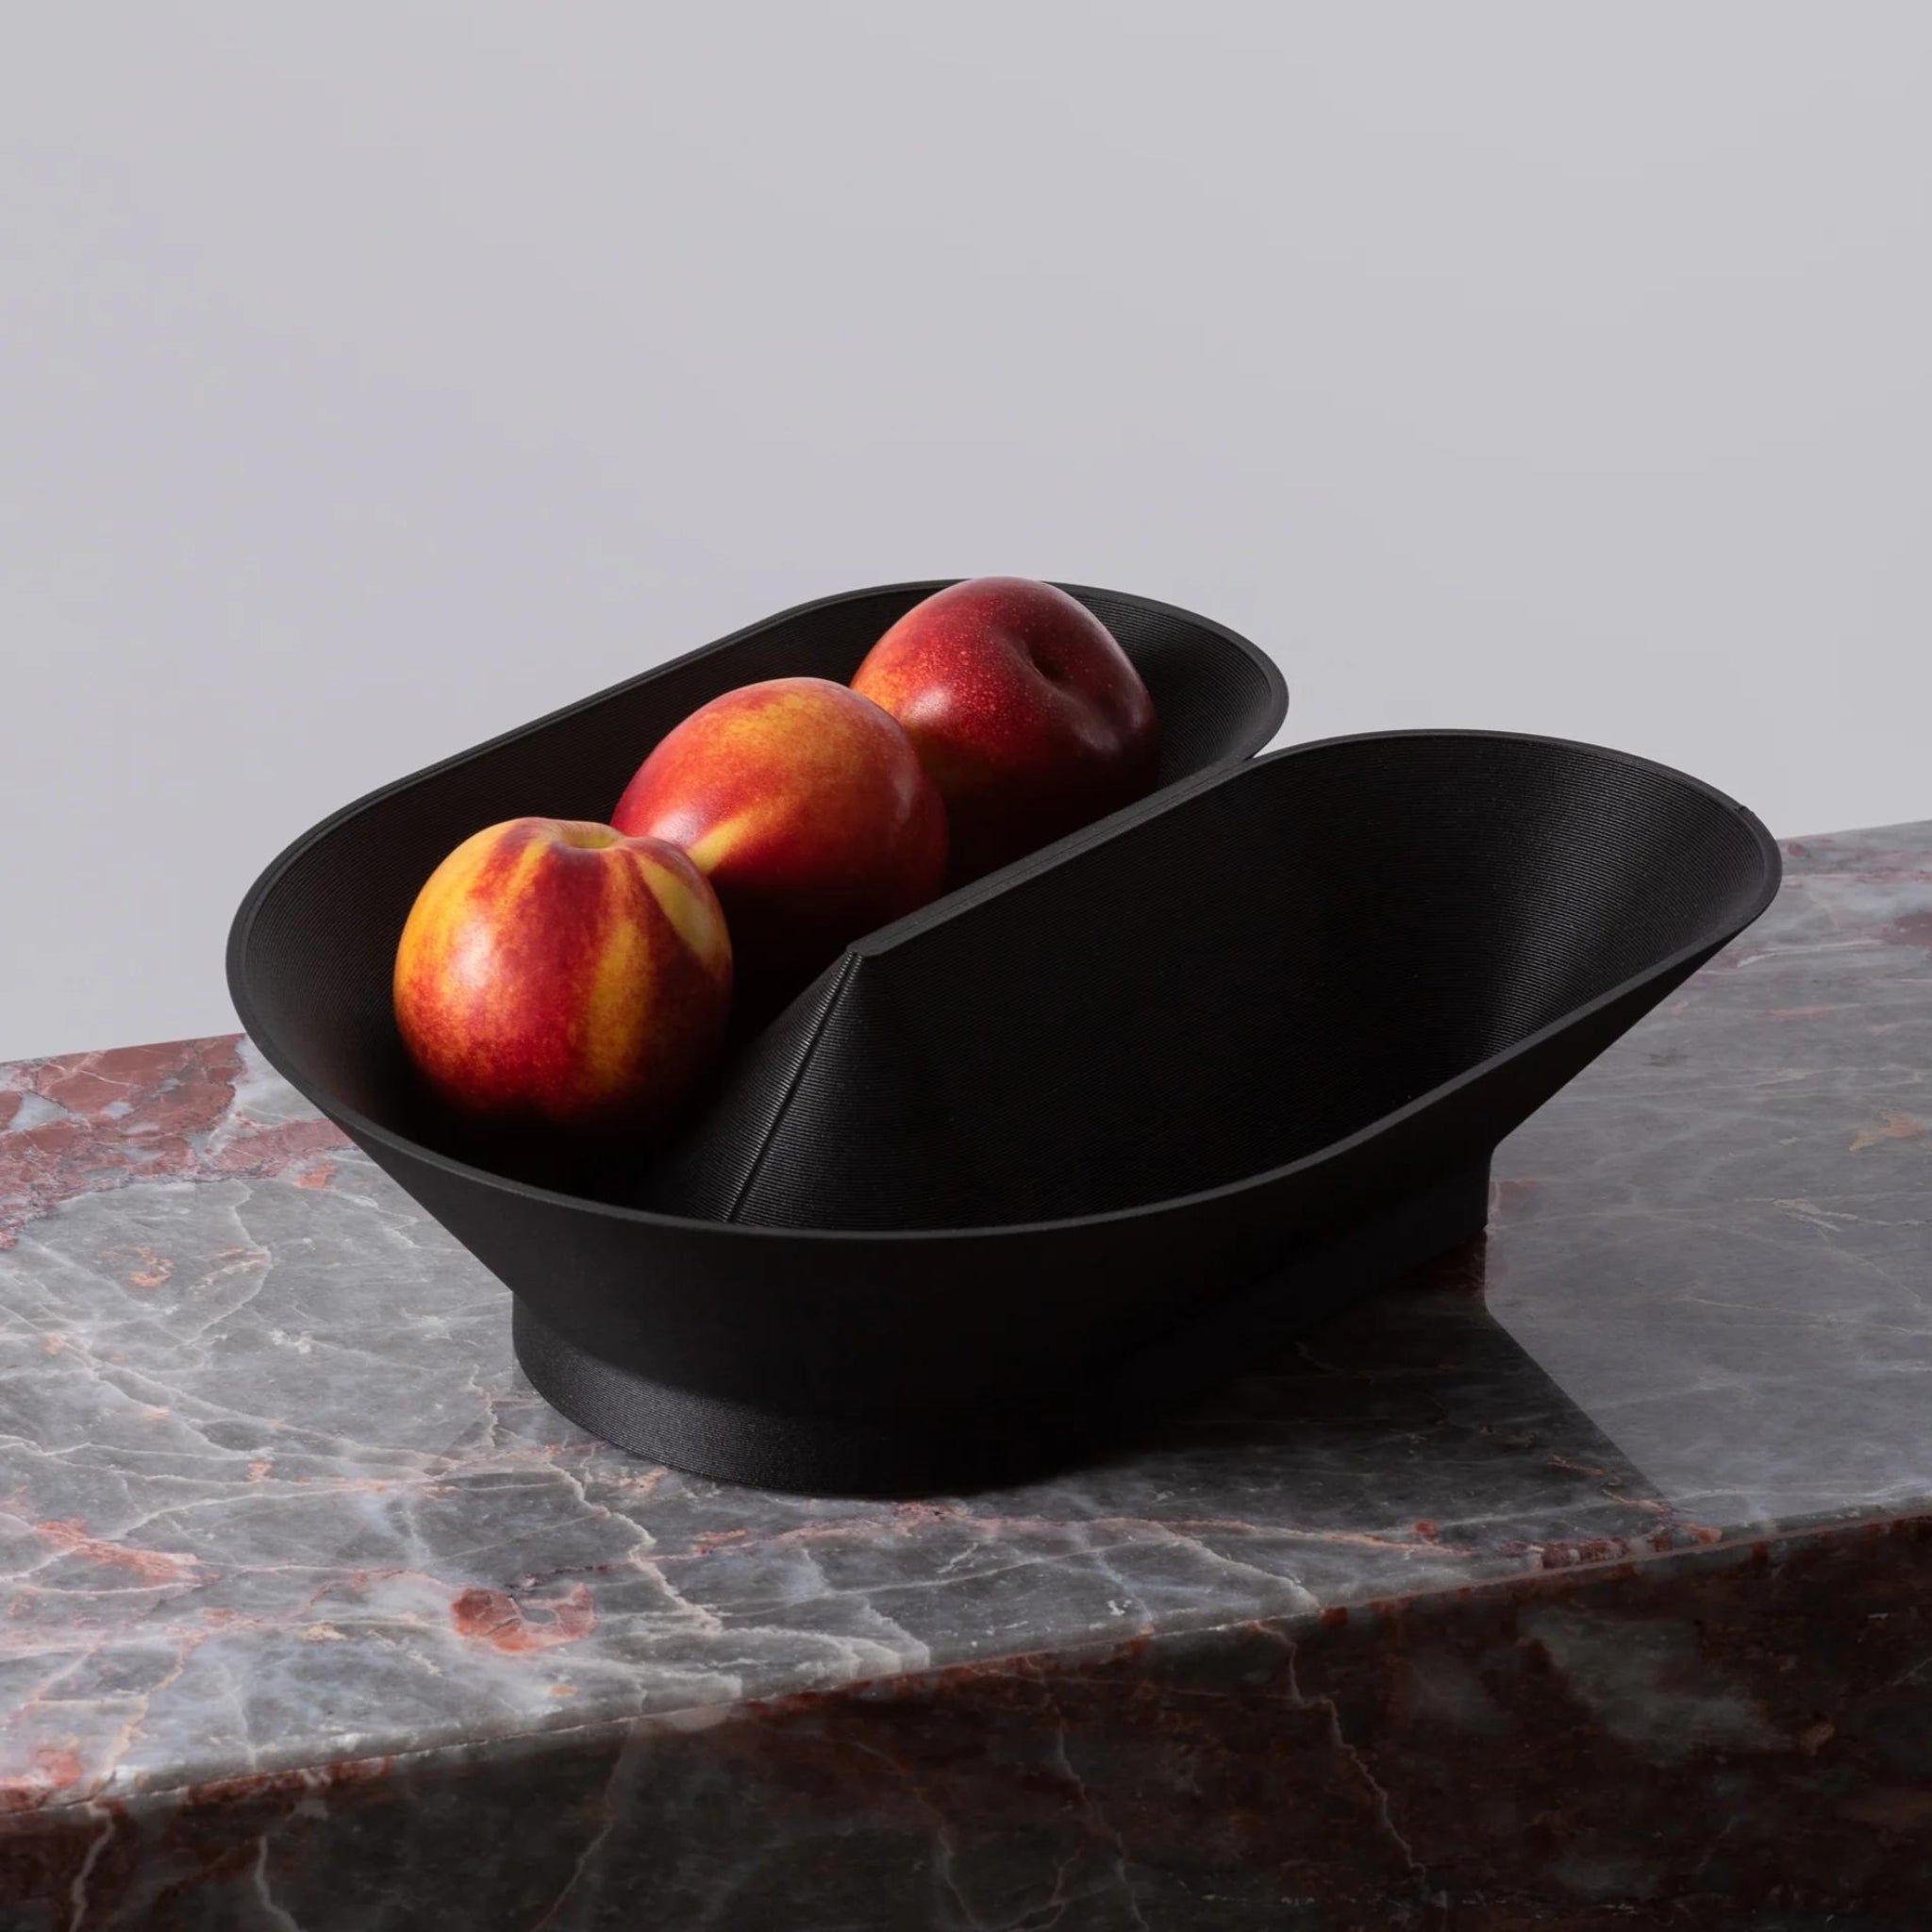 Cyrc U fruit bowl in black. 3D printed recycled plastic bowl holding peaches on a marble surface. 